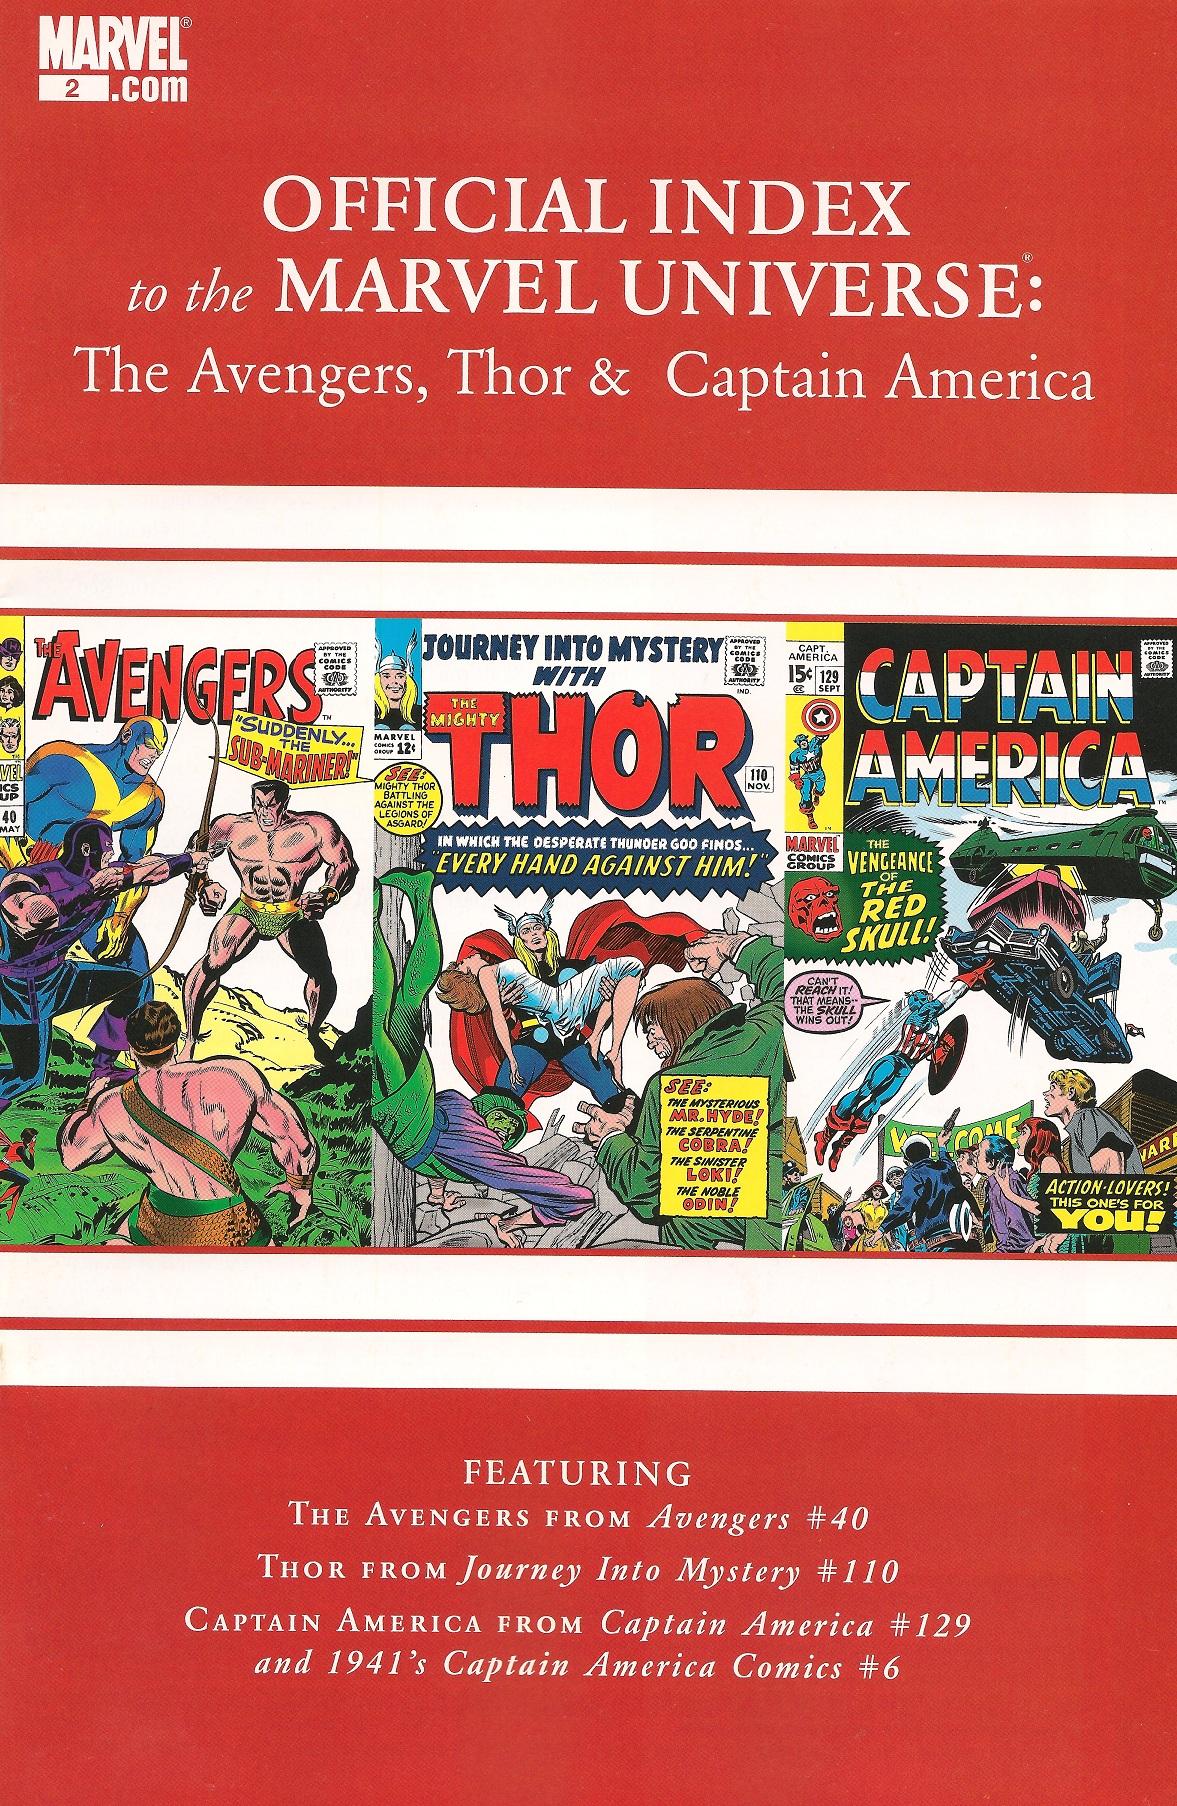 Avengers, Thor & Captain America: Official Index to the Marvel Universe Vol. 1 #2